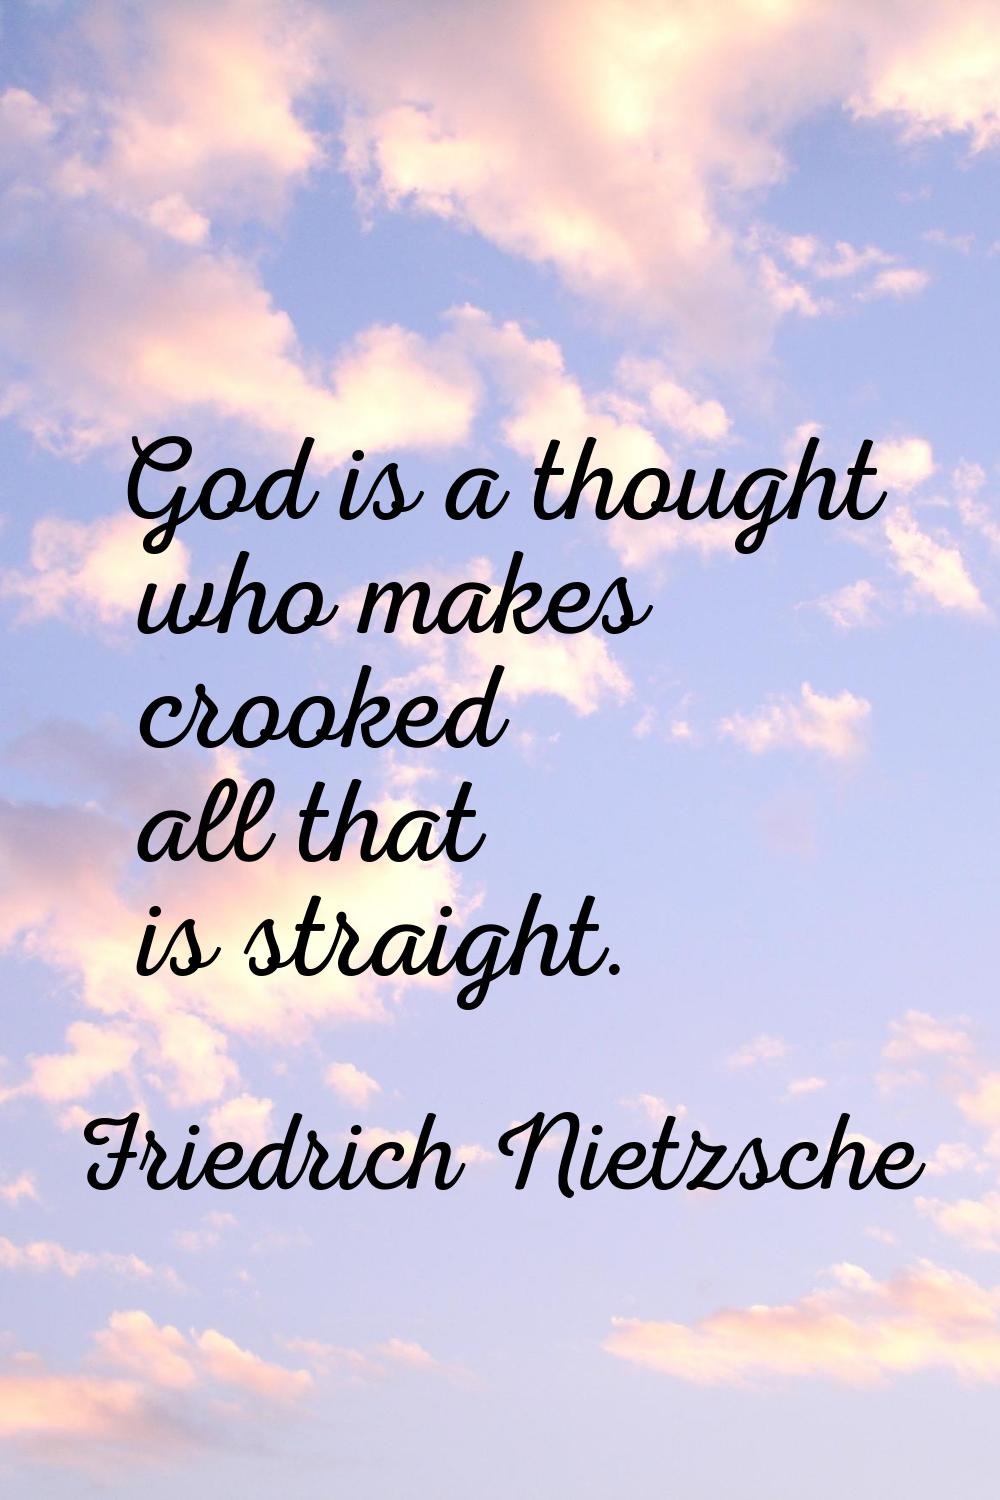 God is a thought who makes crooked all that is straight.